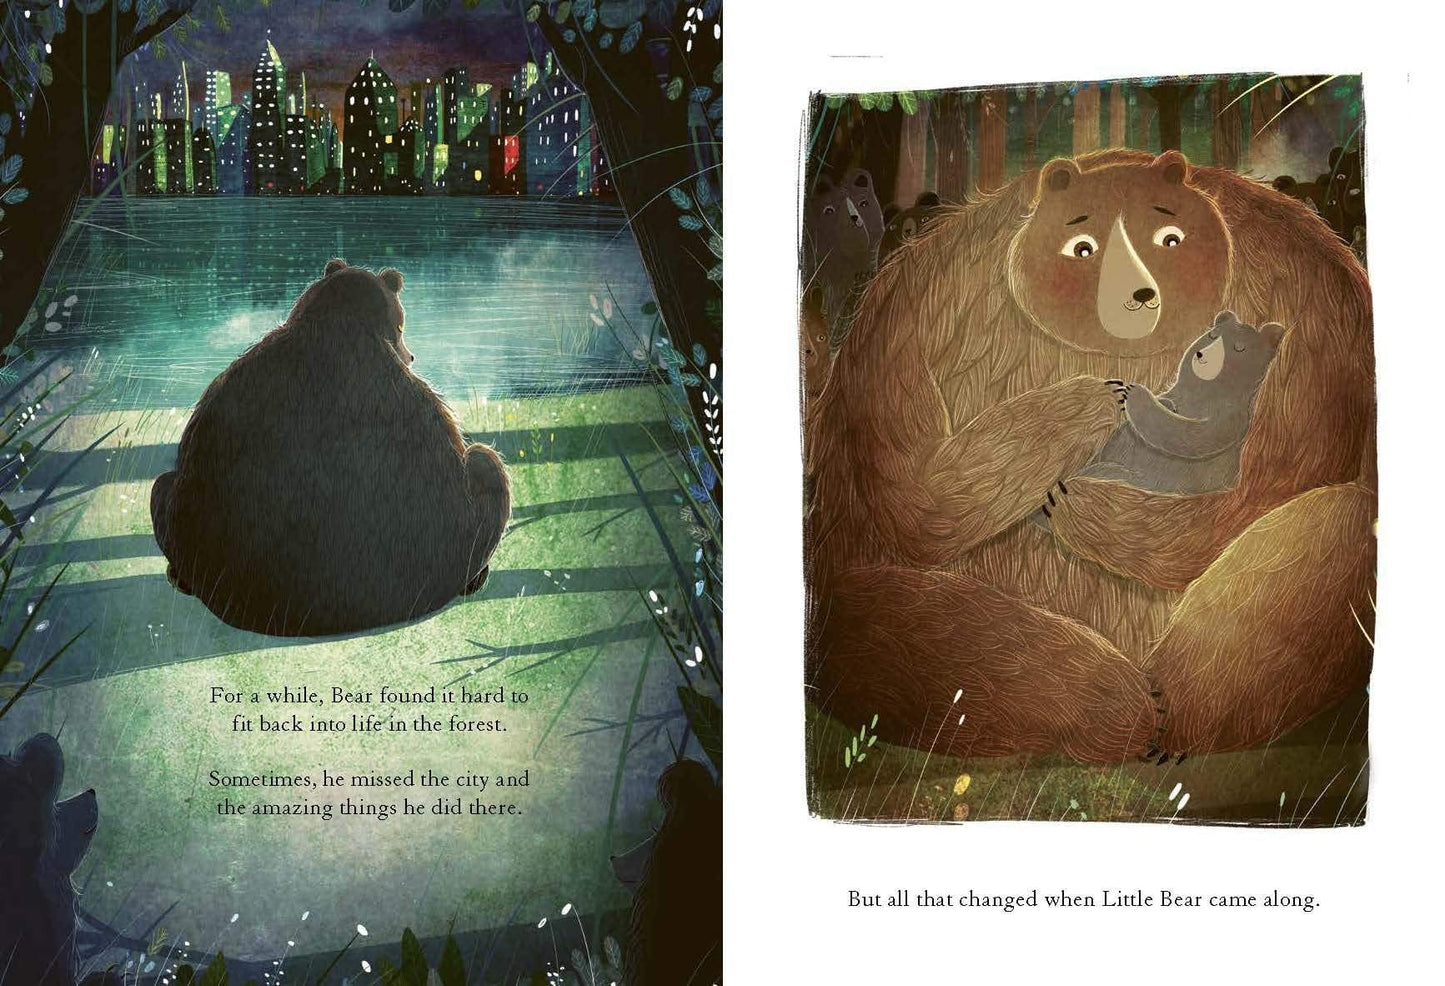 Book Bag Doha  The Bear, the Piano and Little Bear's Concert By David Litchfield